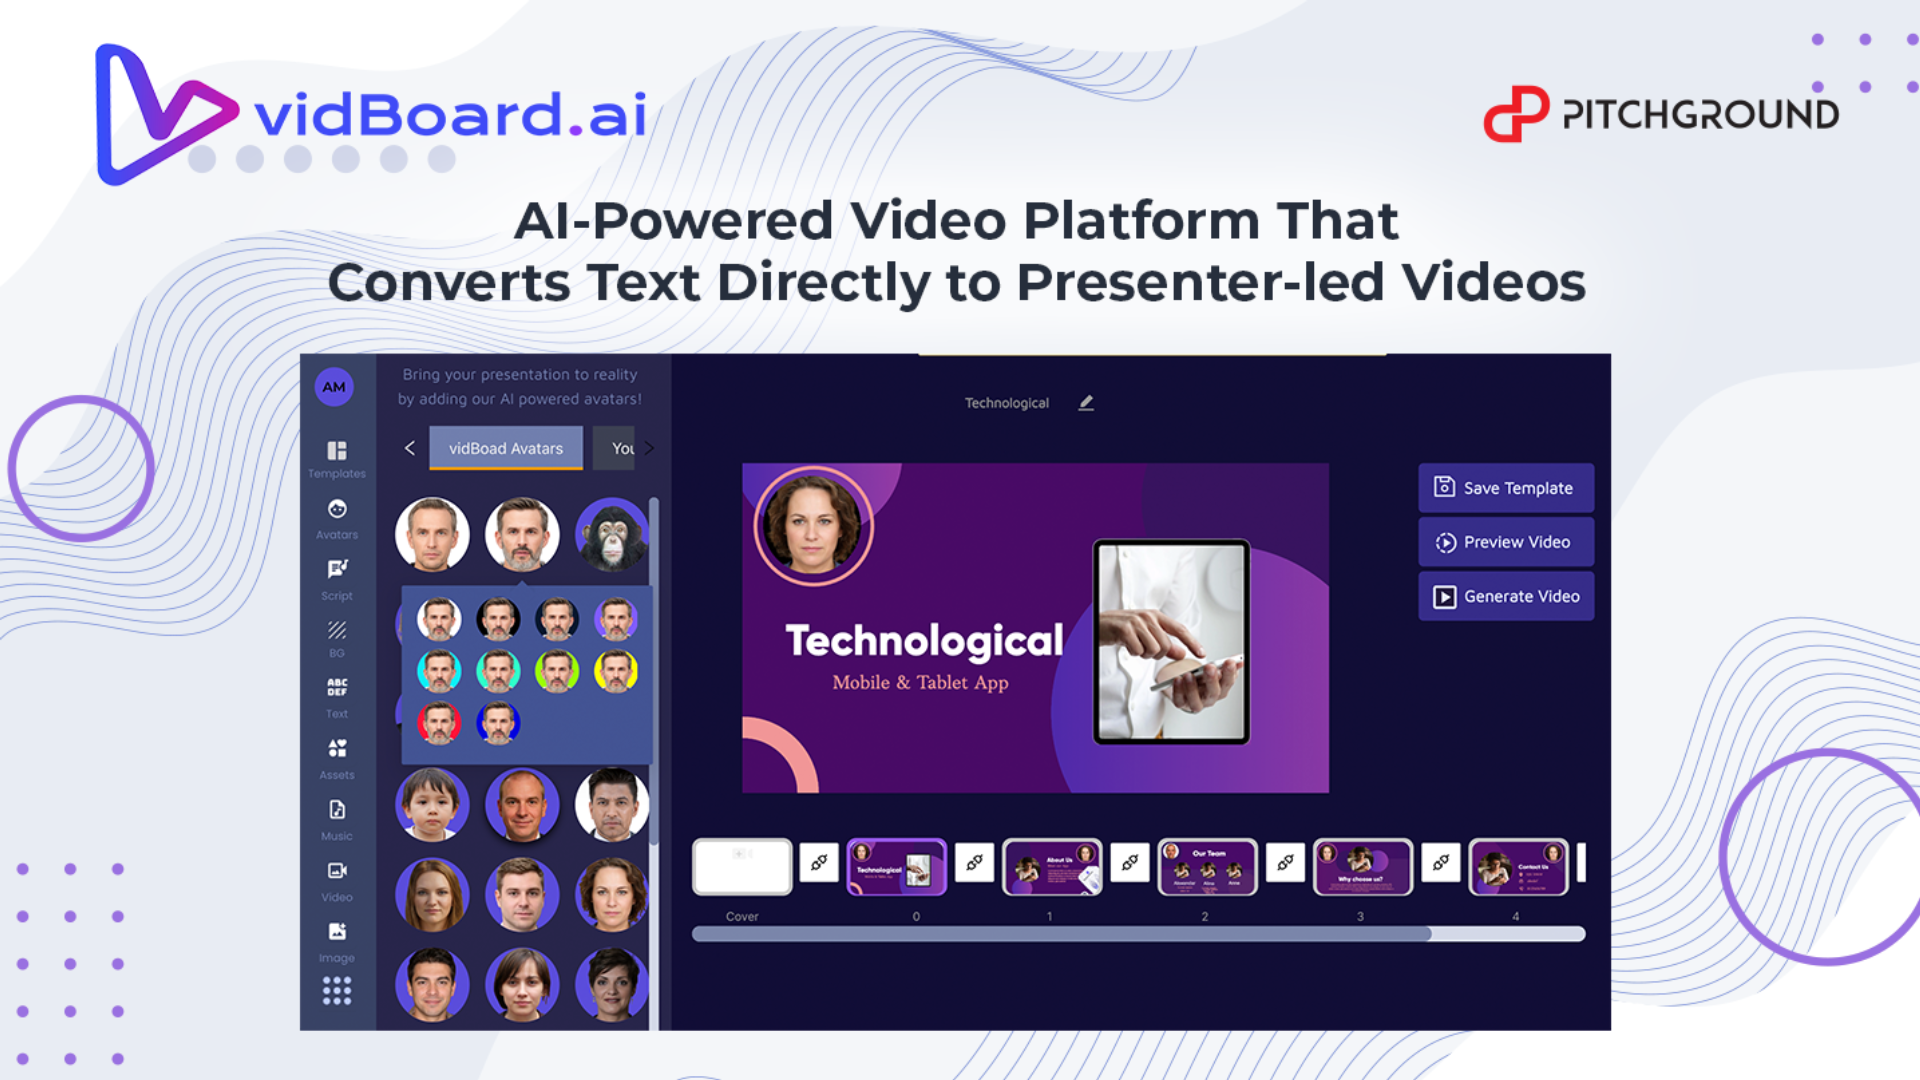 Lifetime Deal to vidBoard.ai: Plan B for $197